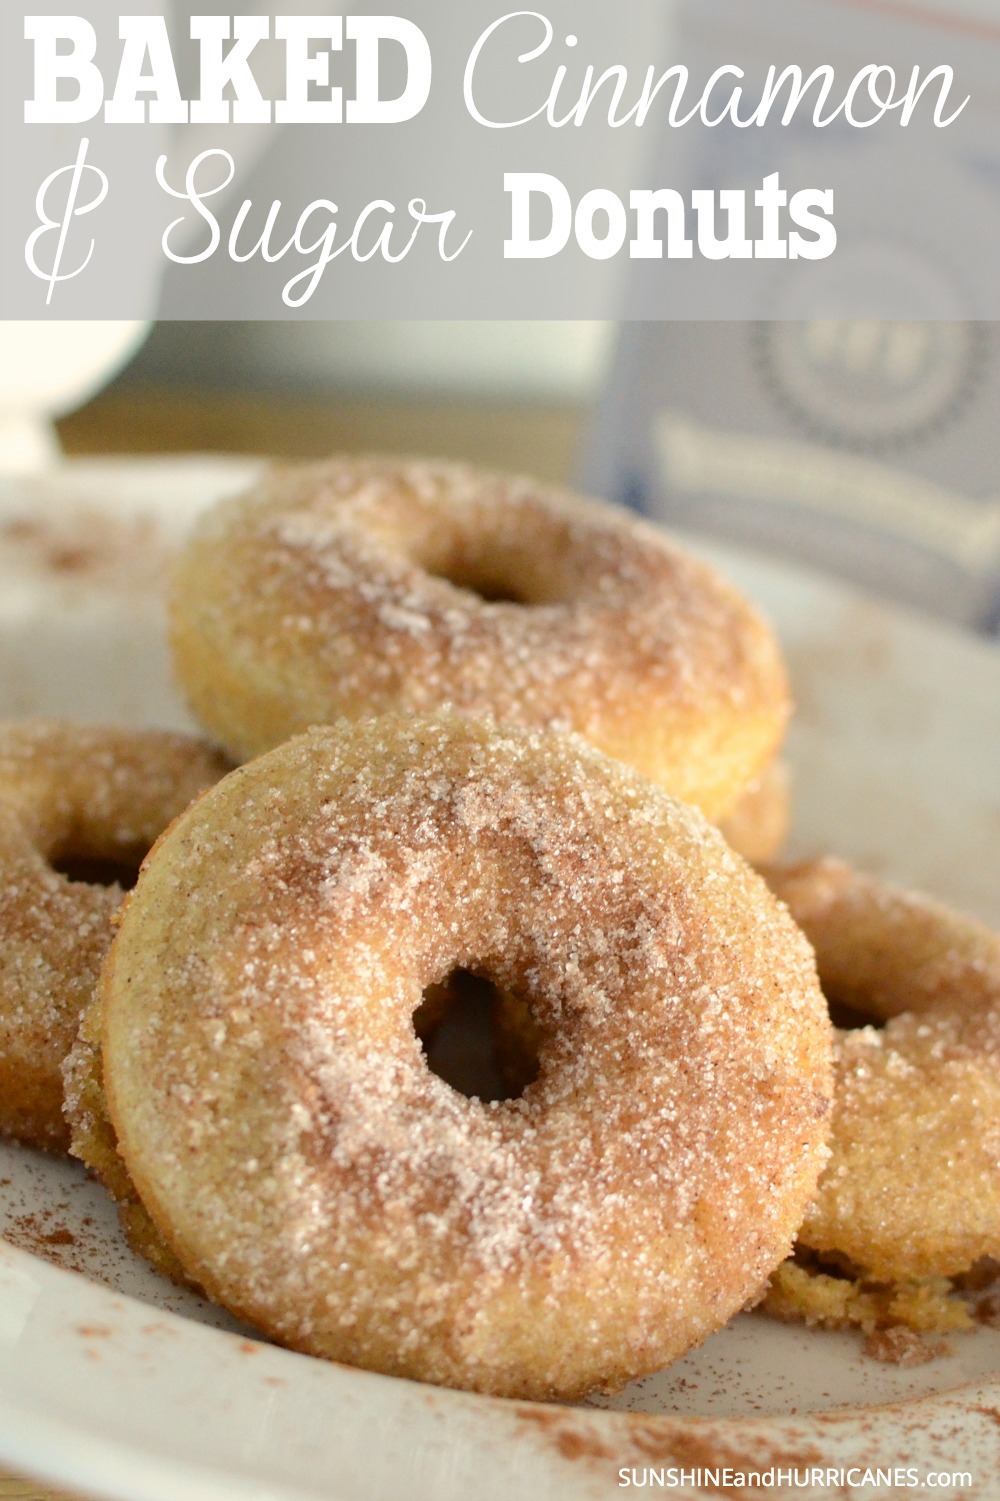 A sweet and tasty breakfast treat that you can fill good about feeding your kiddos. Baked and not fried, it's a yummy option for a lazy weekend morning at home to enjoy with everyone still in their PJ's. Cinnamon and Sugar Baked Donut Recipe. SunshineandHurricanes.com